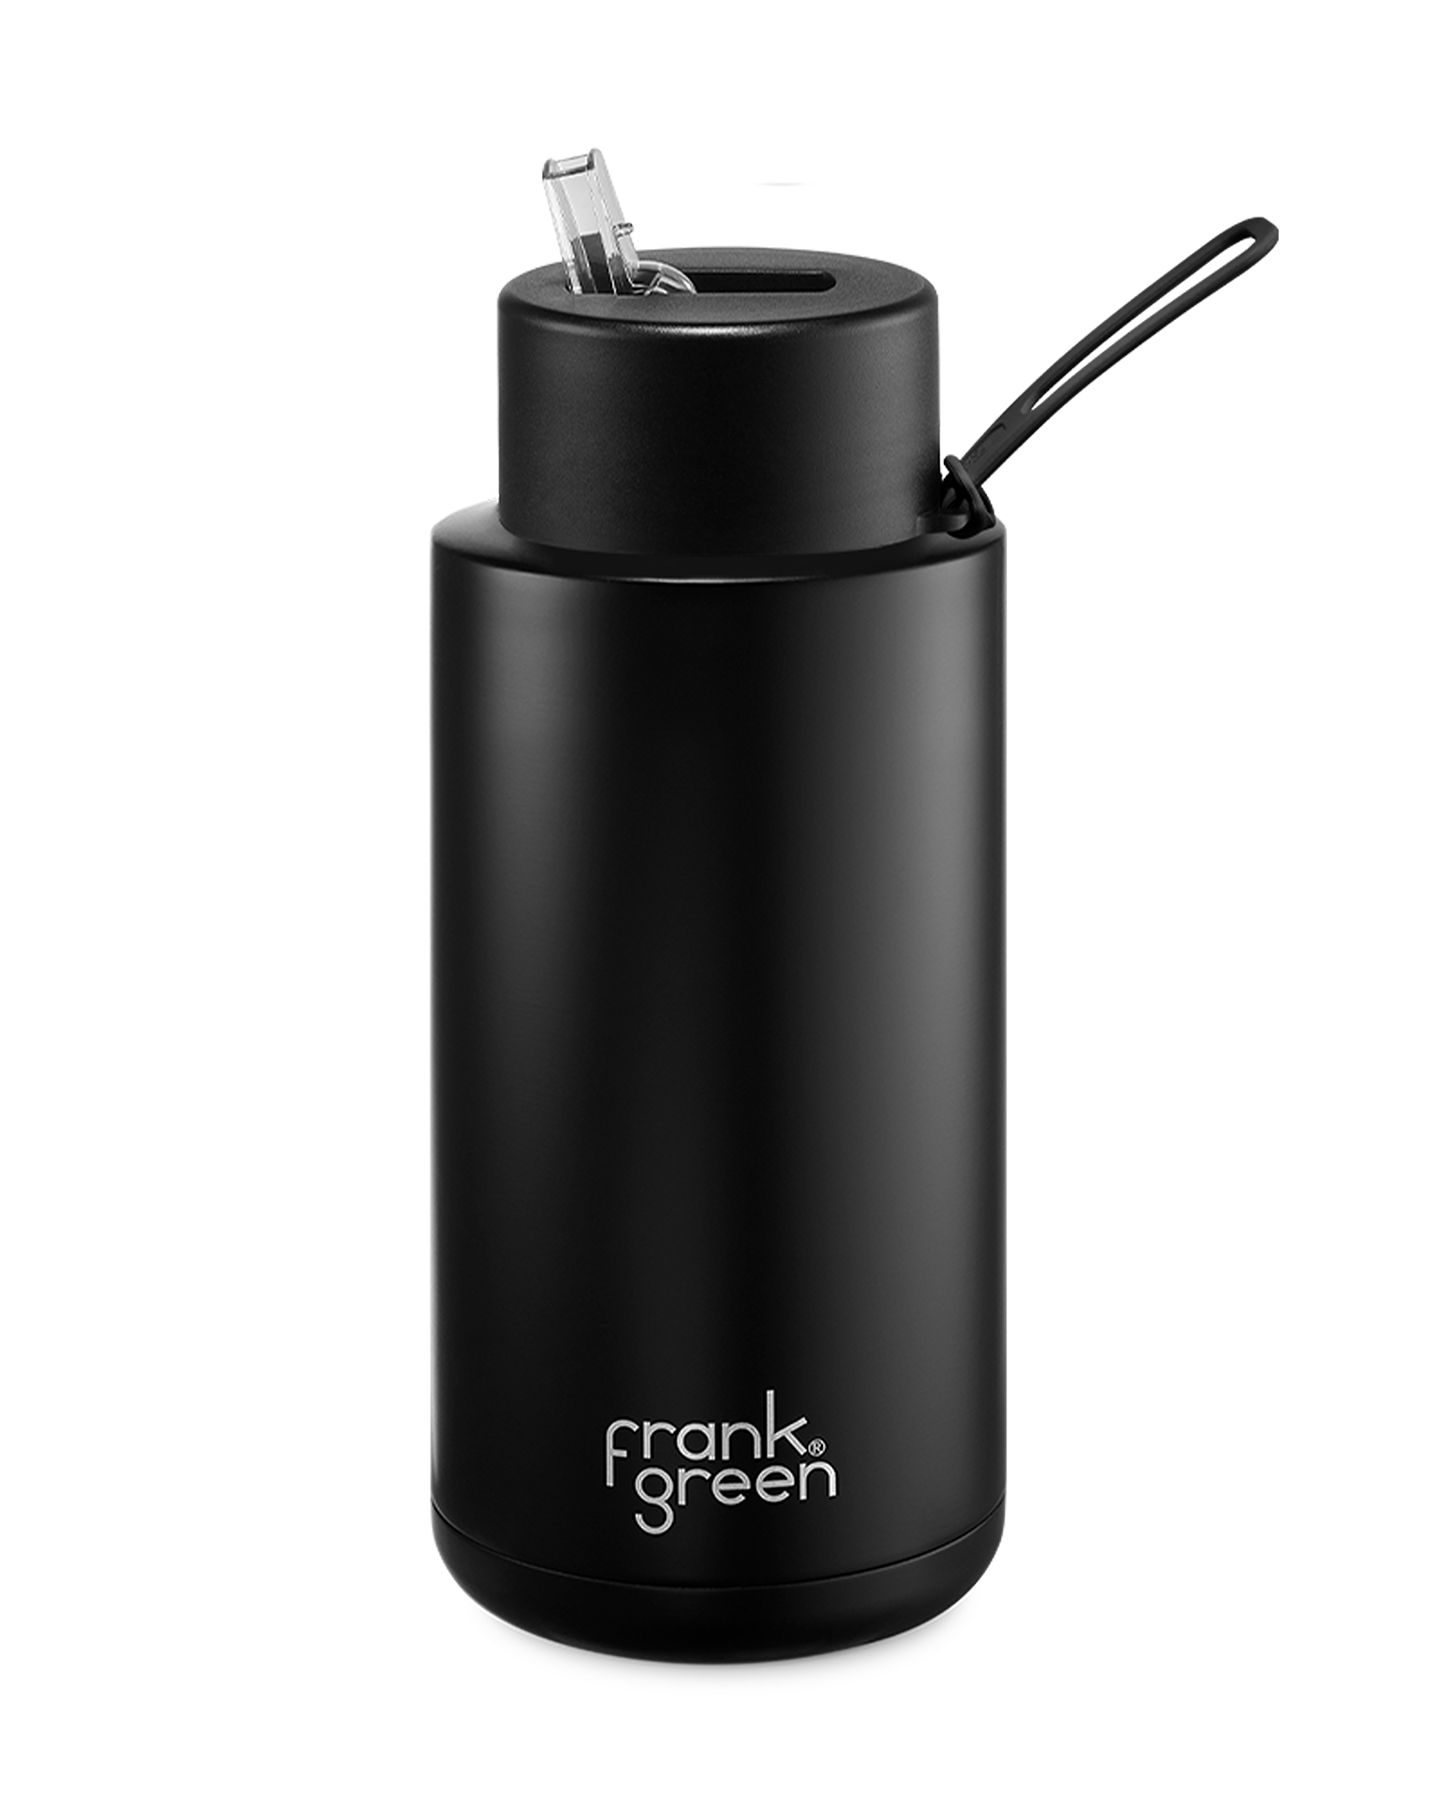 FRANK GREEN CERAMIC REUSABLE BOTTLE 34oz/1 LITRE WITH STRAW LID - Midnight